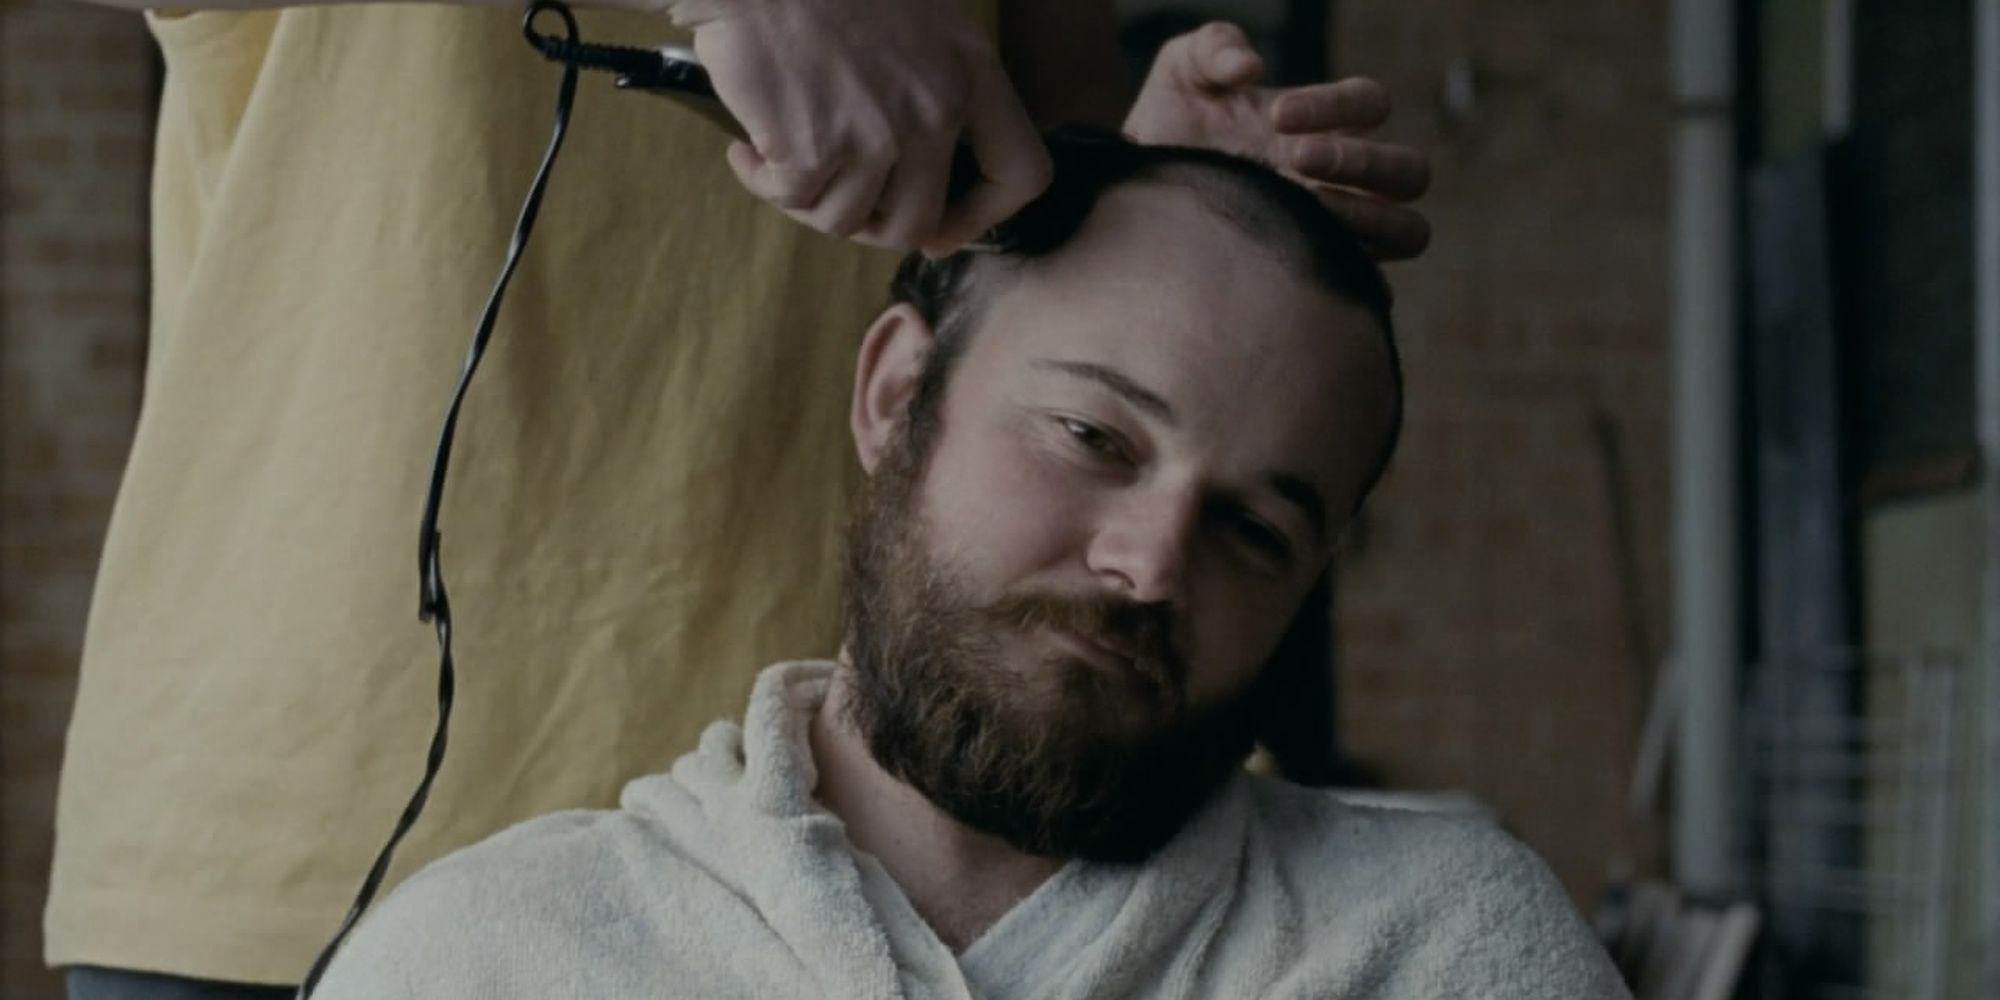 A man getting his head shaved